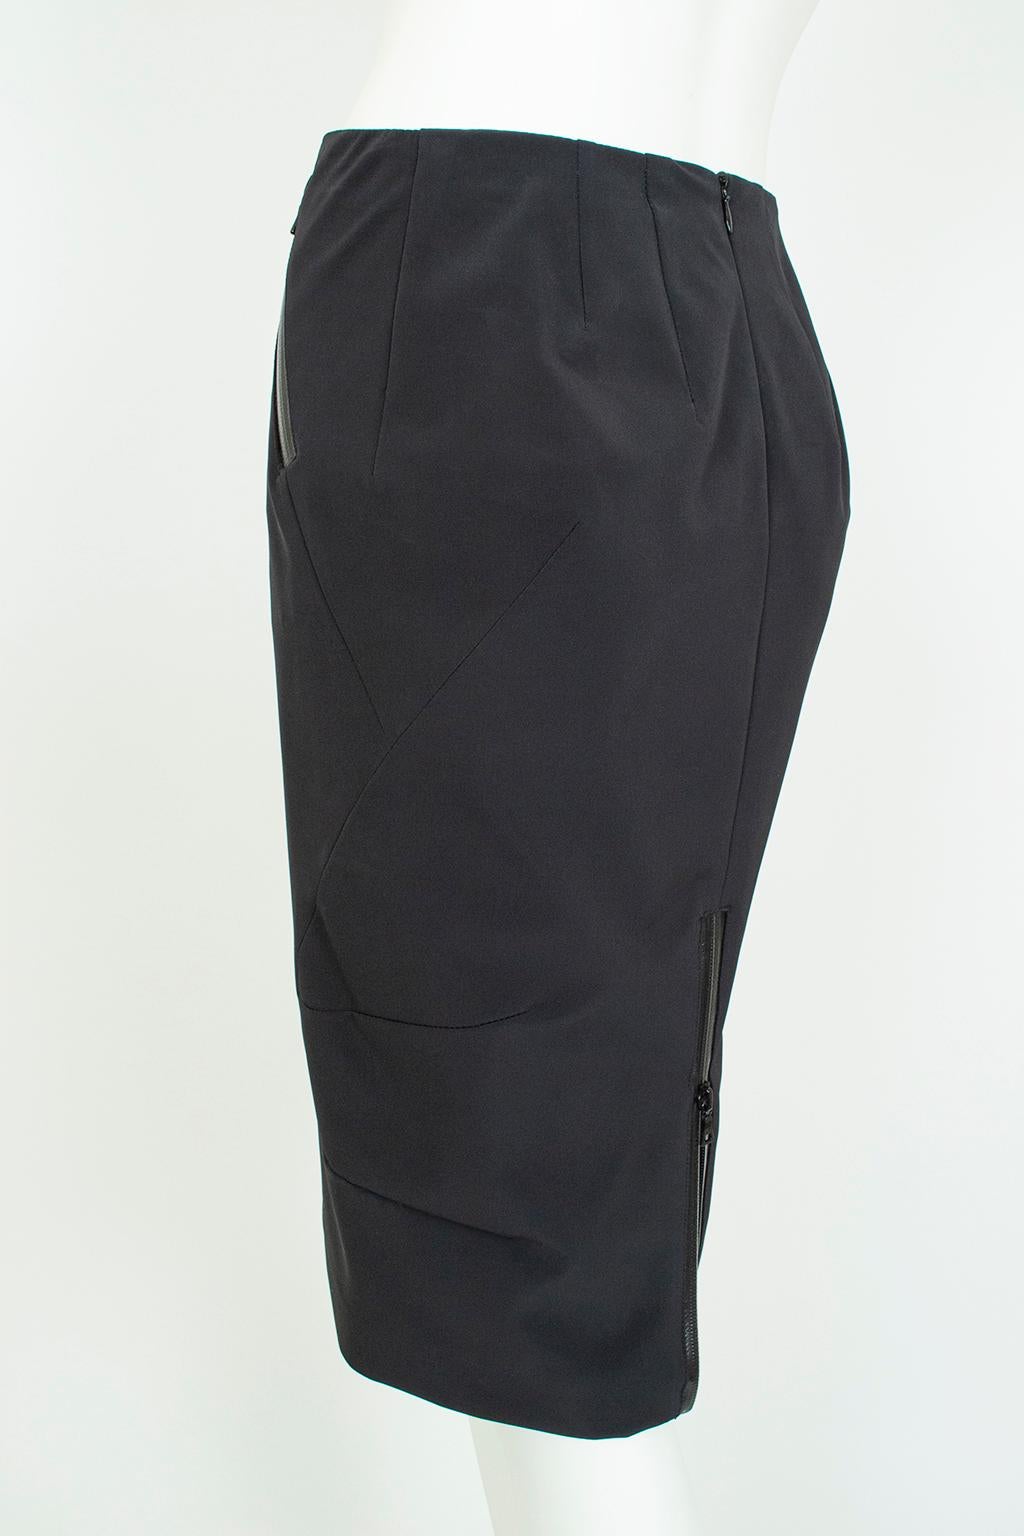 Women's New Prada Black Corset-Seam Pencil Skirt with Vinyl Zippers and Vent – S, 2001 For Sale